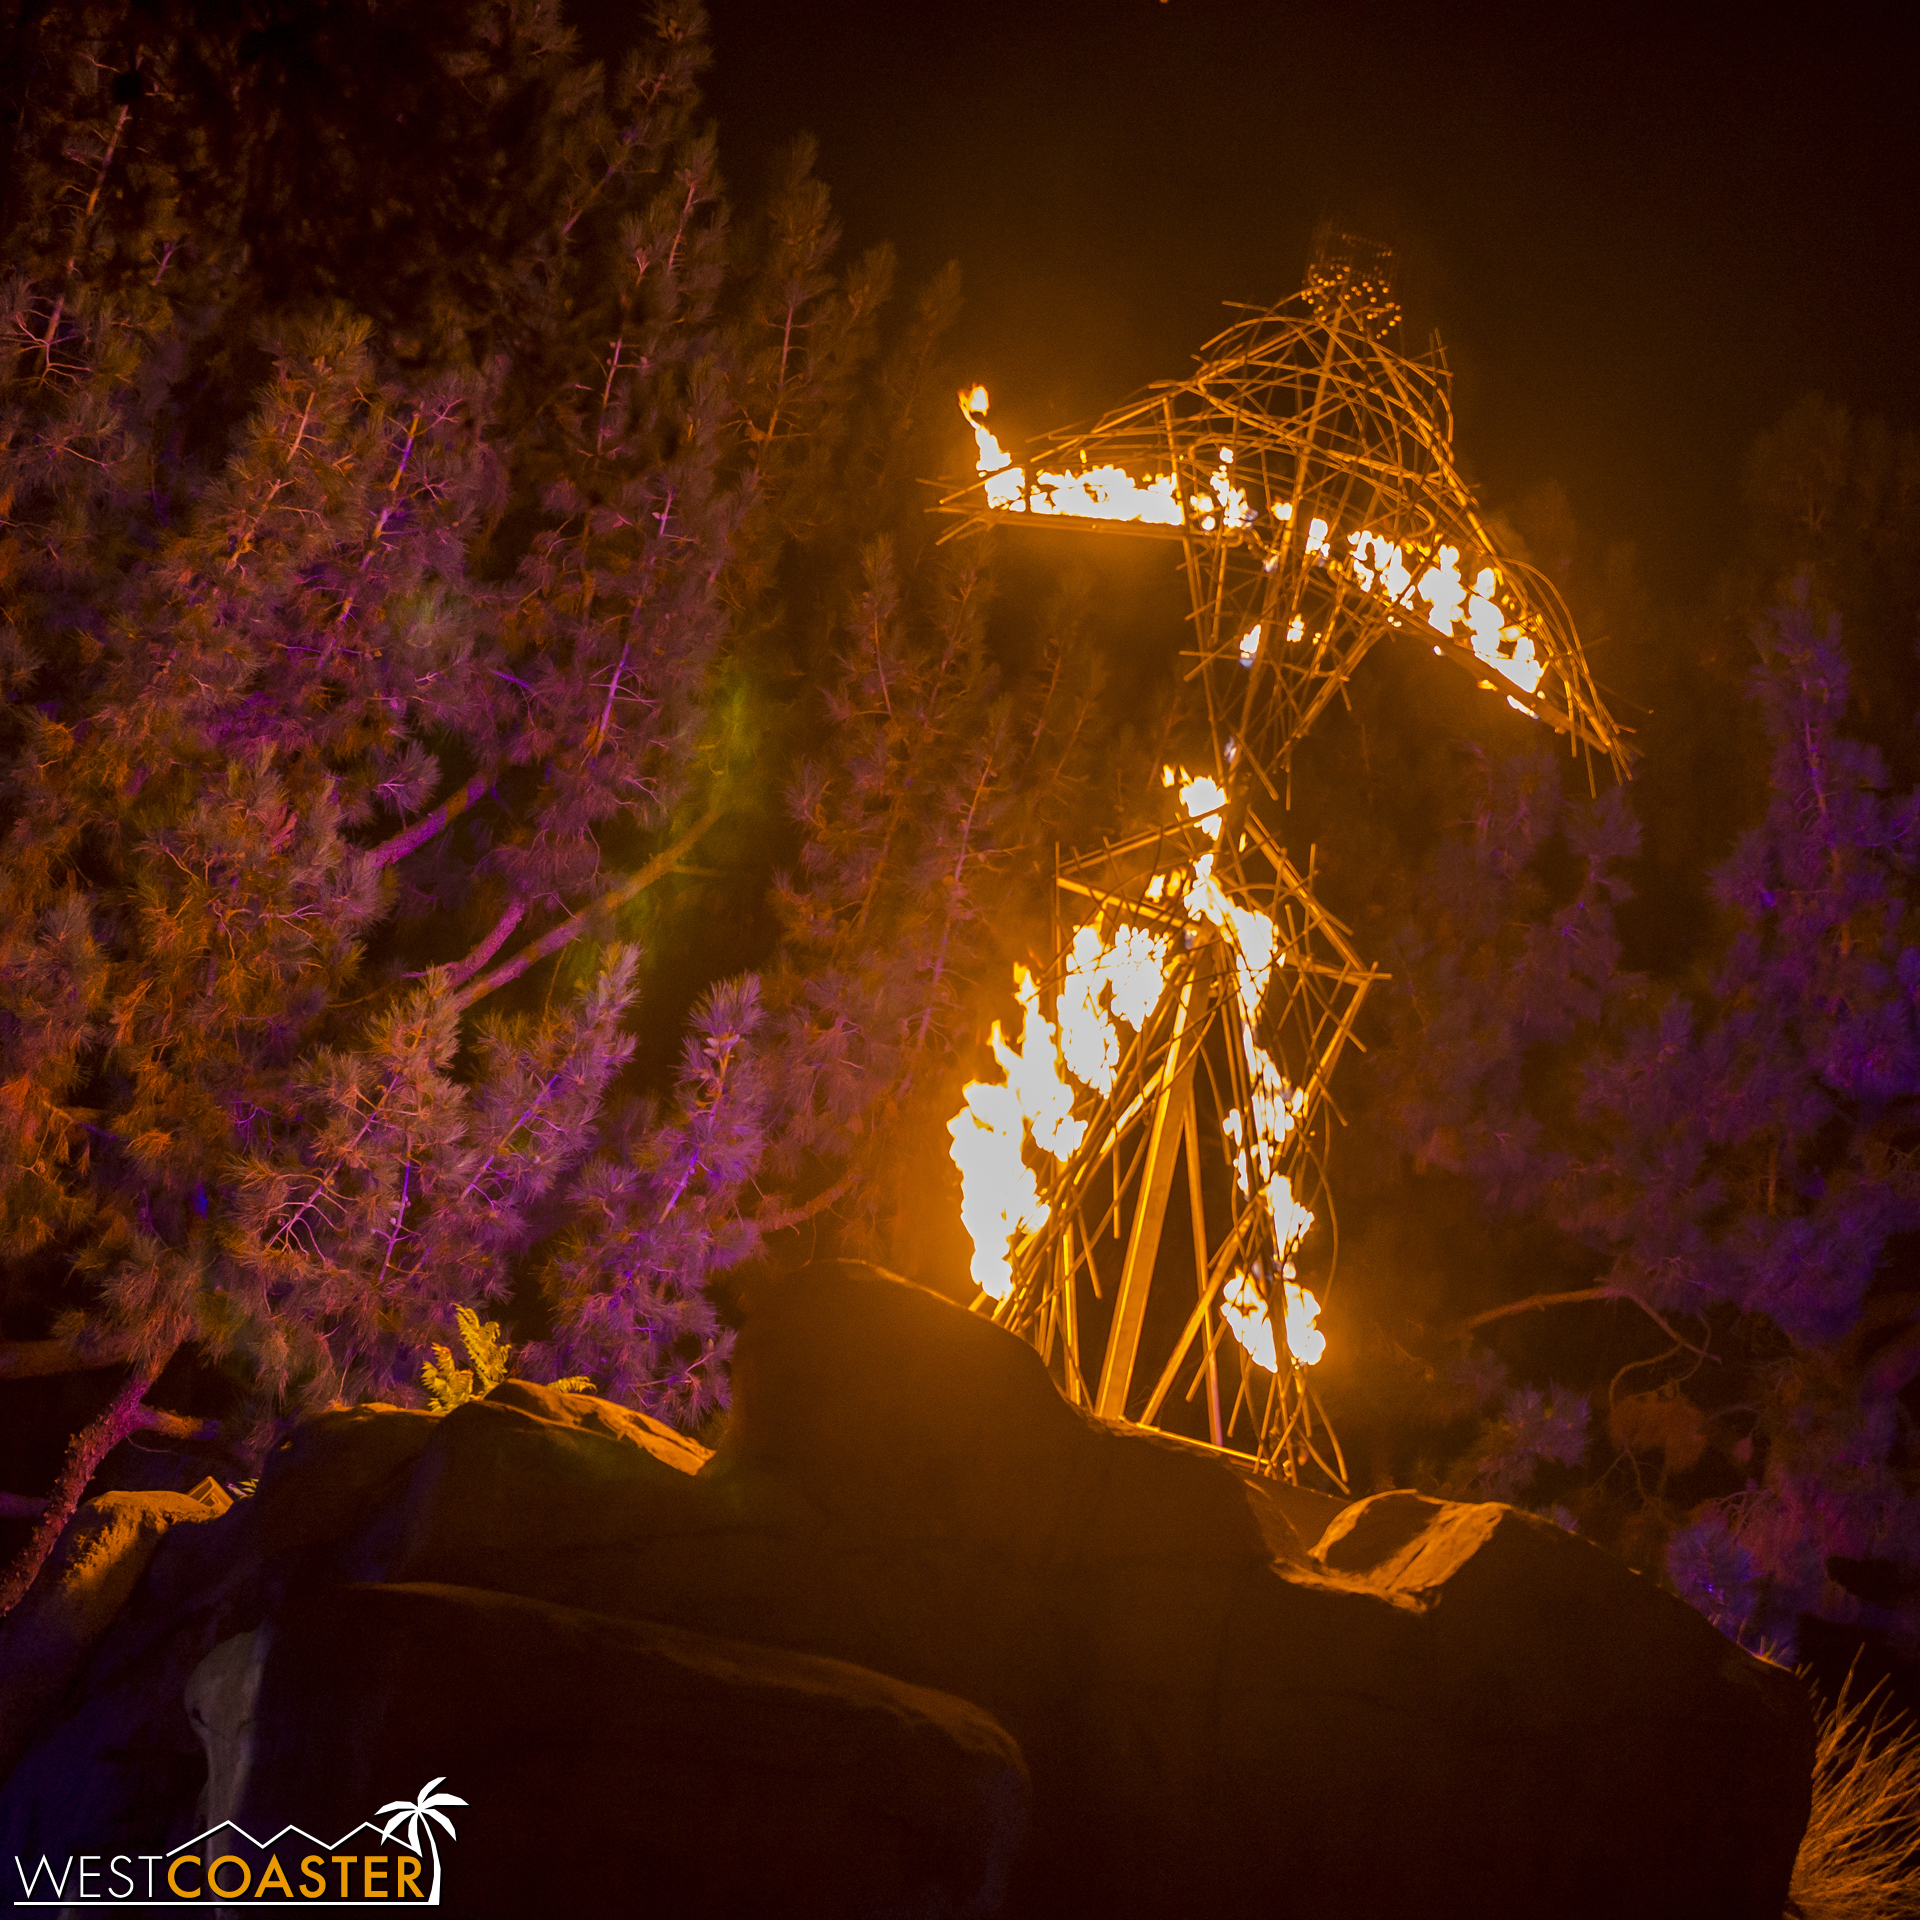  The wicker man bursts into flames as a climactic emphasis on this warning. 